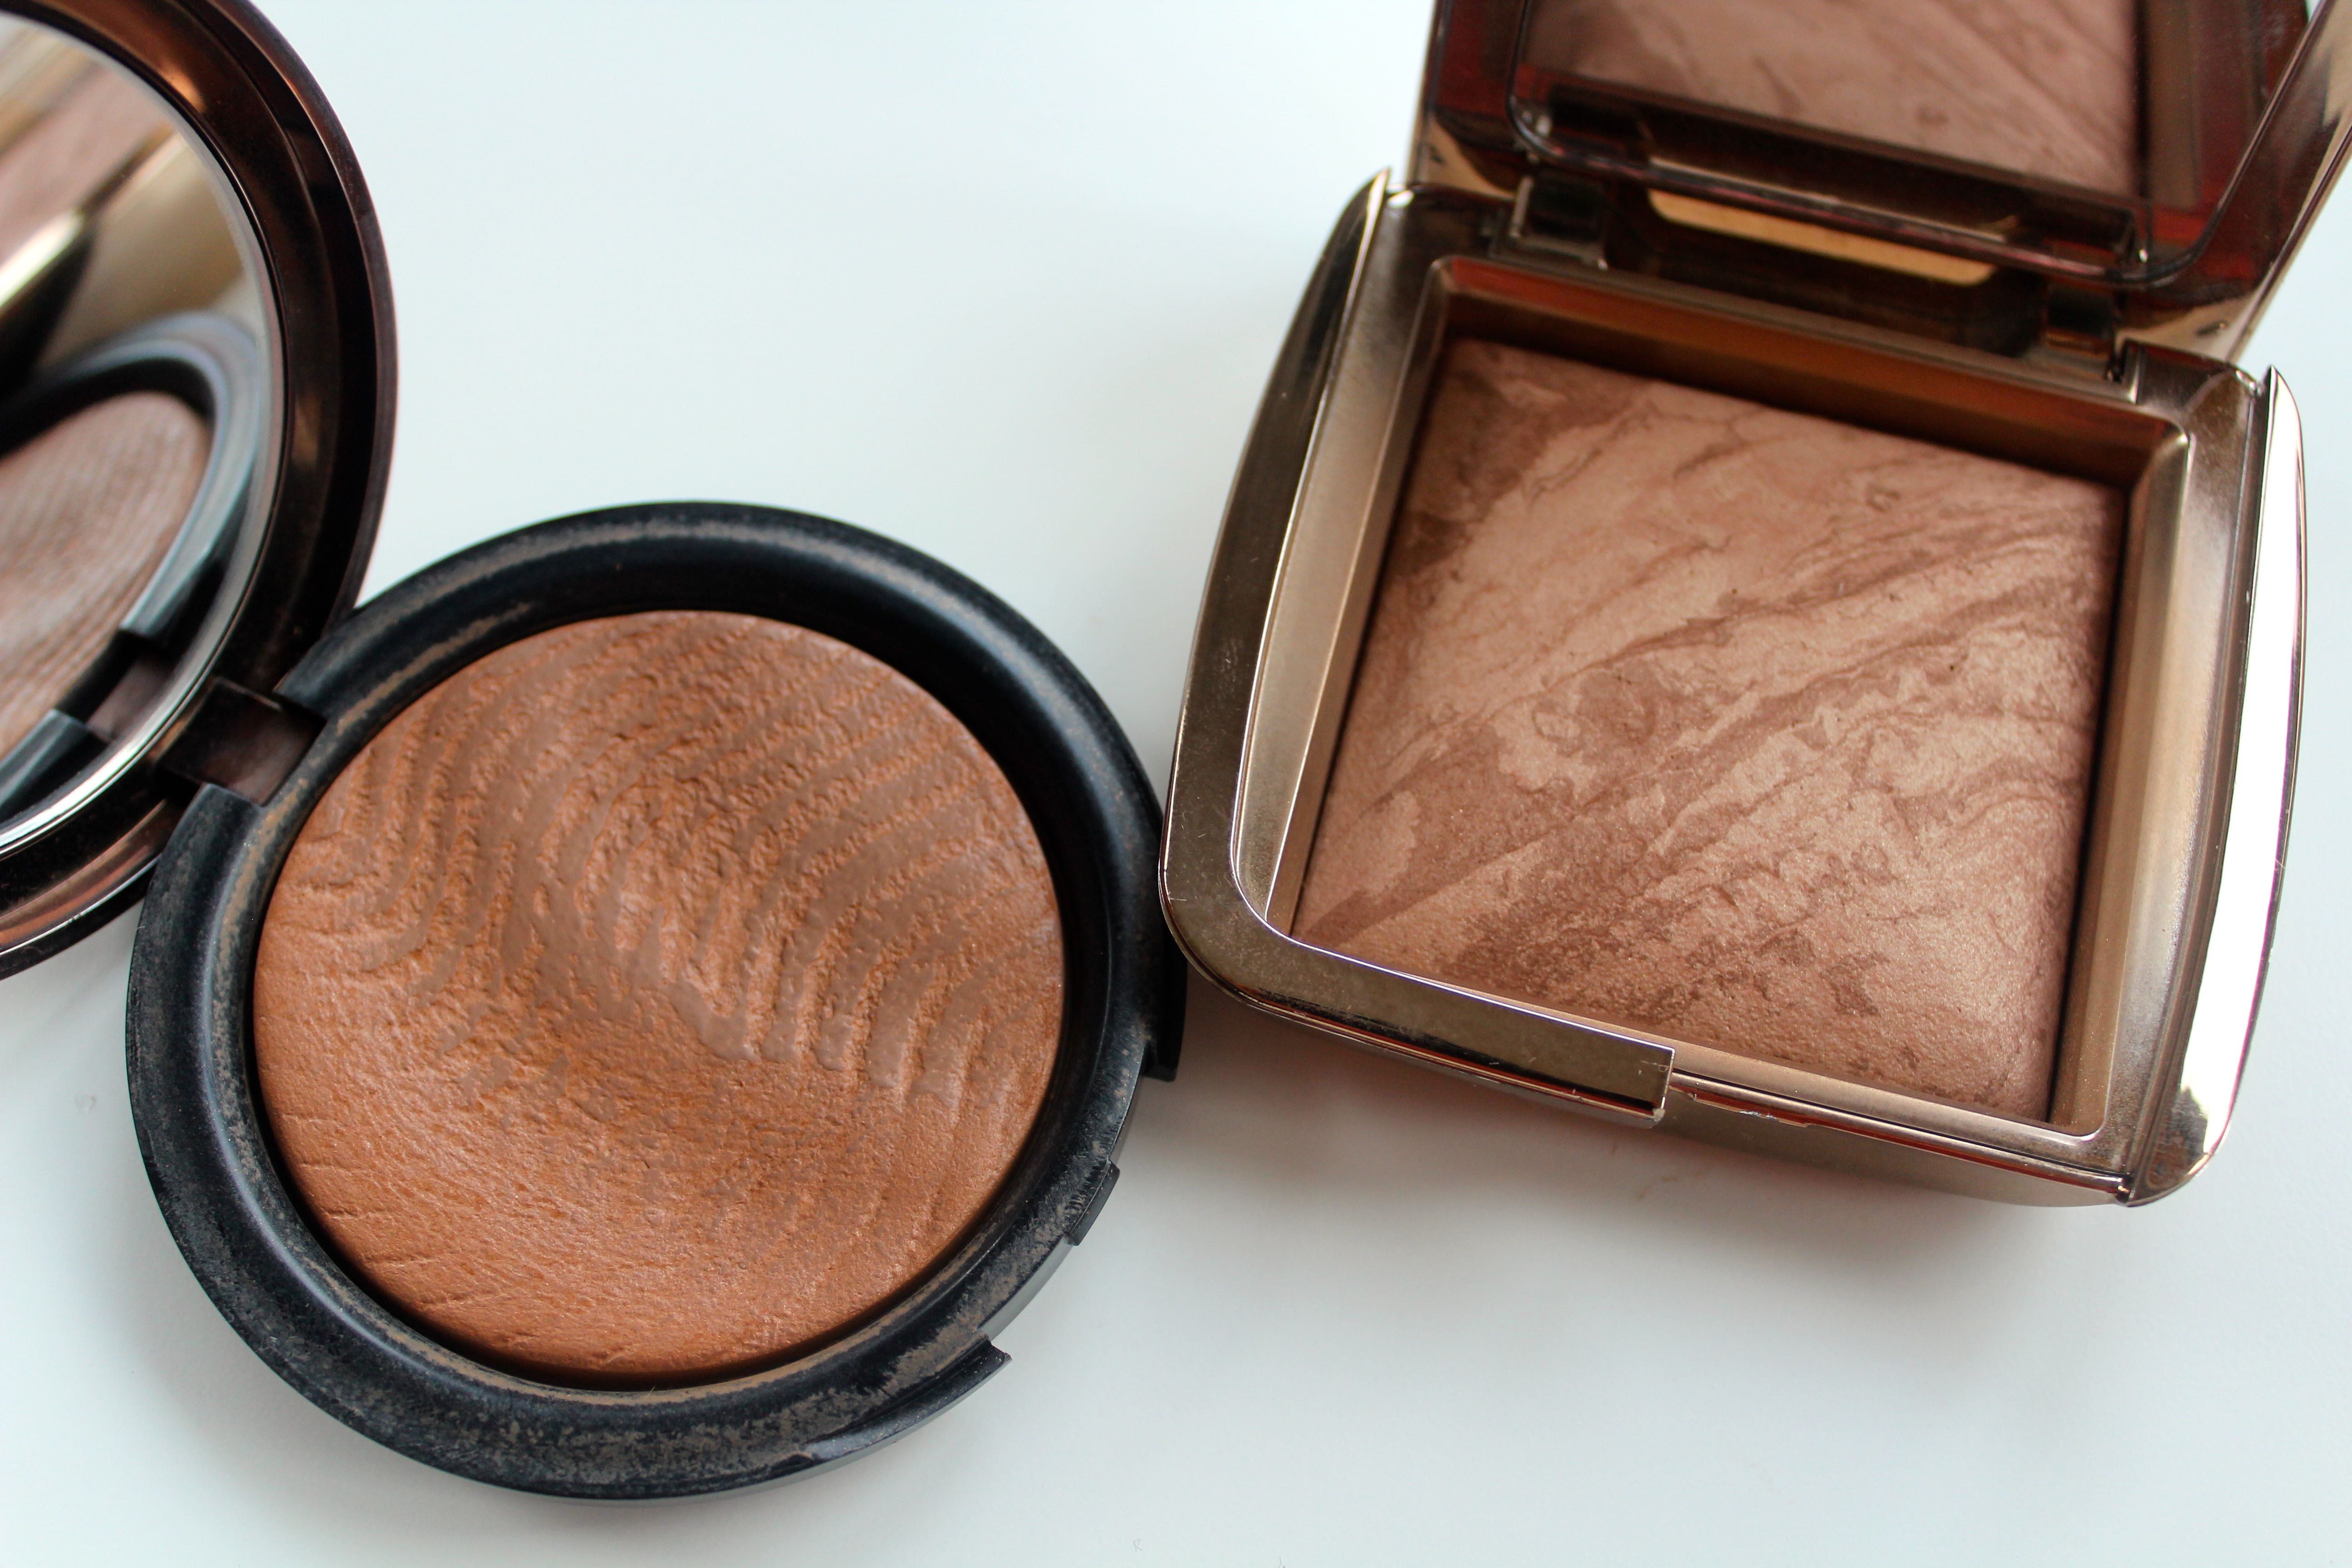 Hourglass Ambient Lighting Bronzer vs Make Up For Ever Pro Bronze Fusion Review by Face Made Up